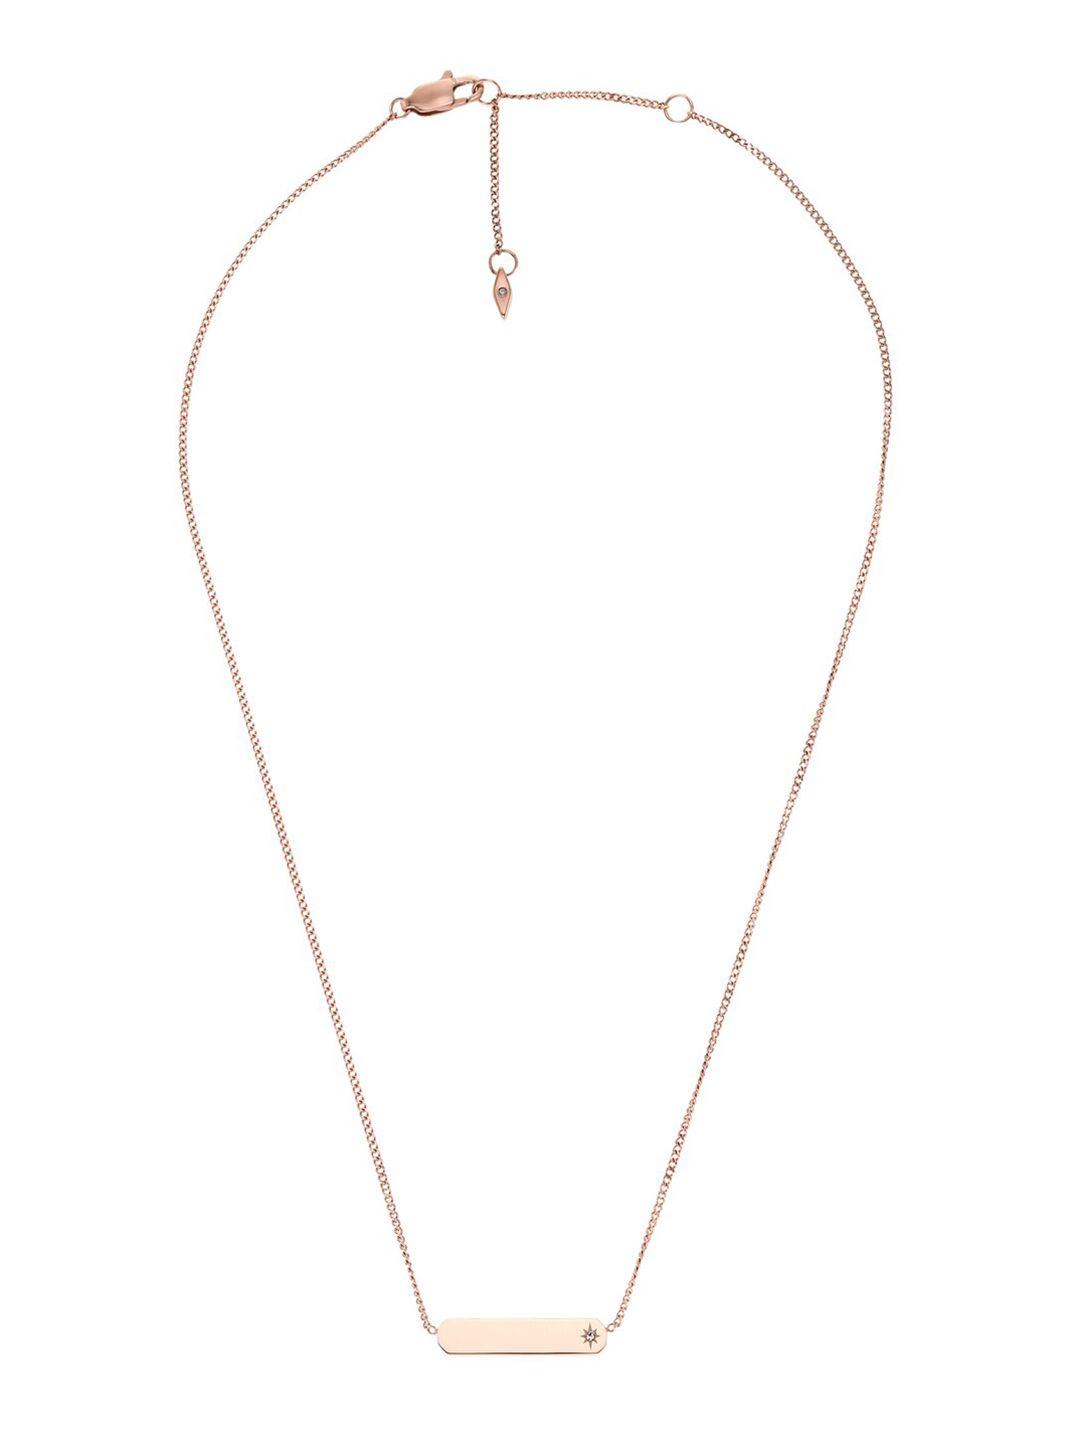 fossil women rose gold rhodium-plated necklace chain